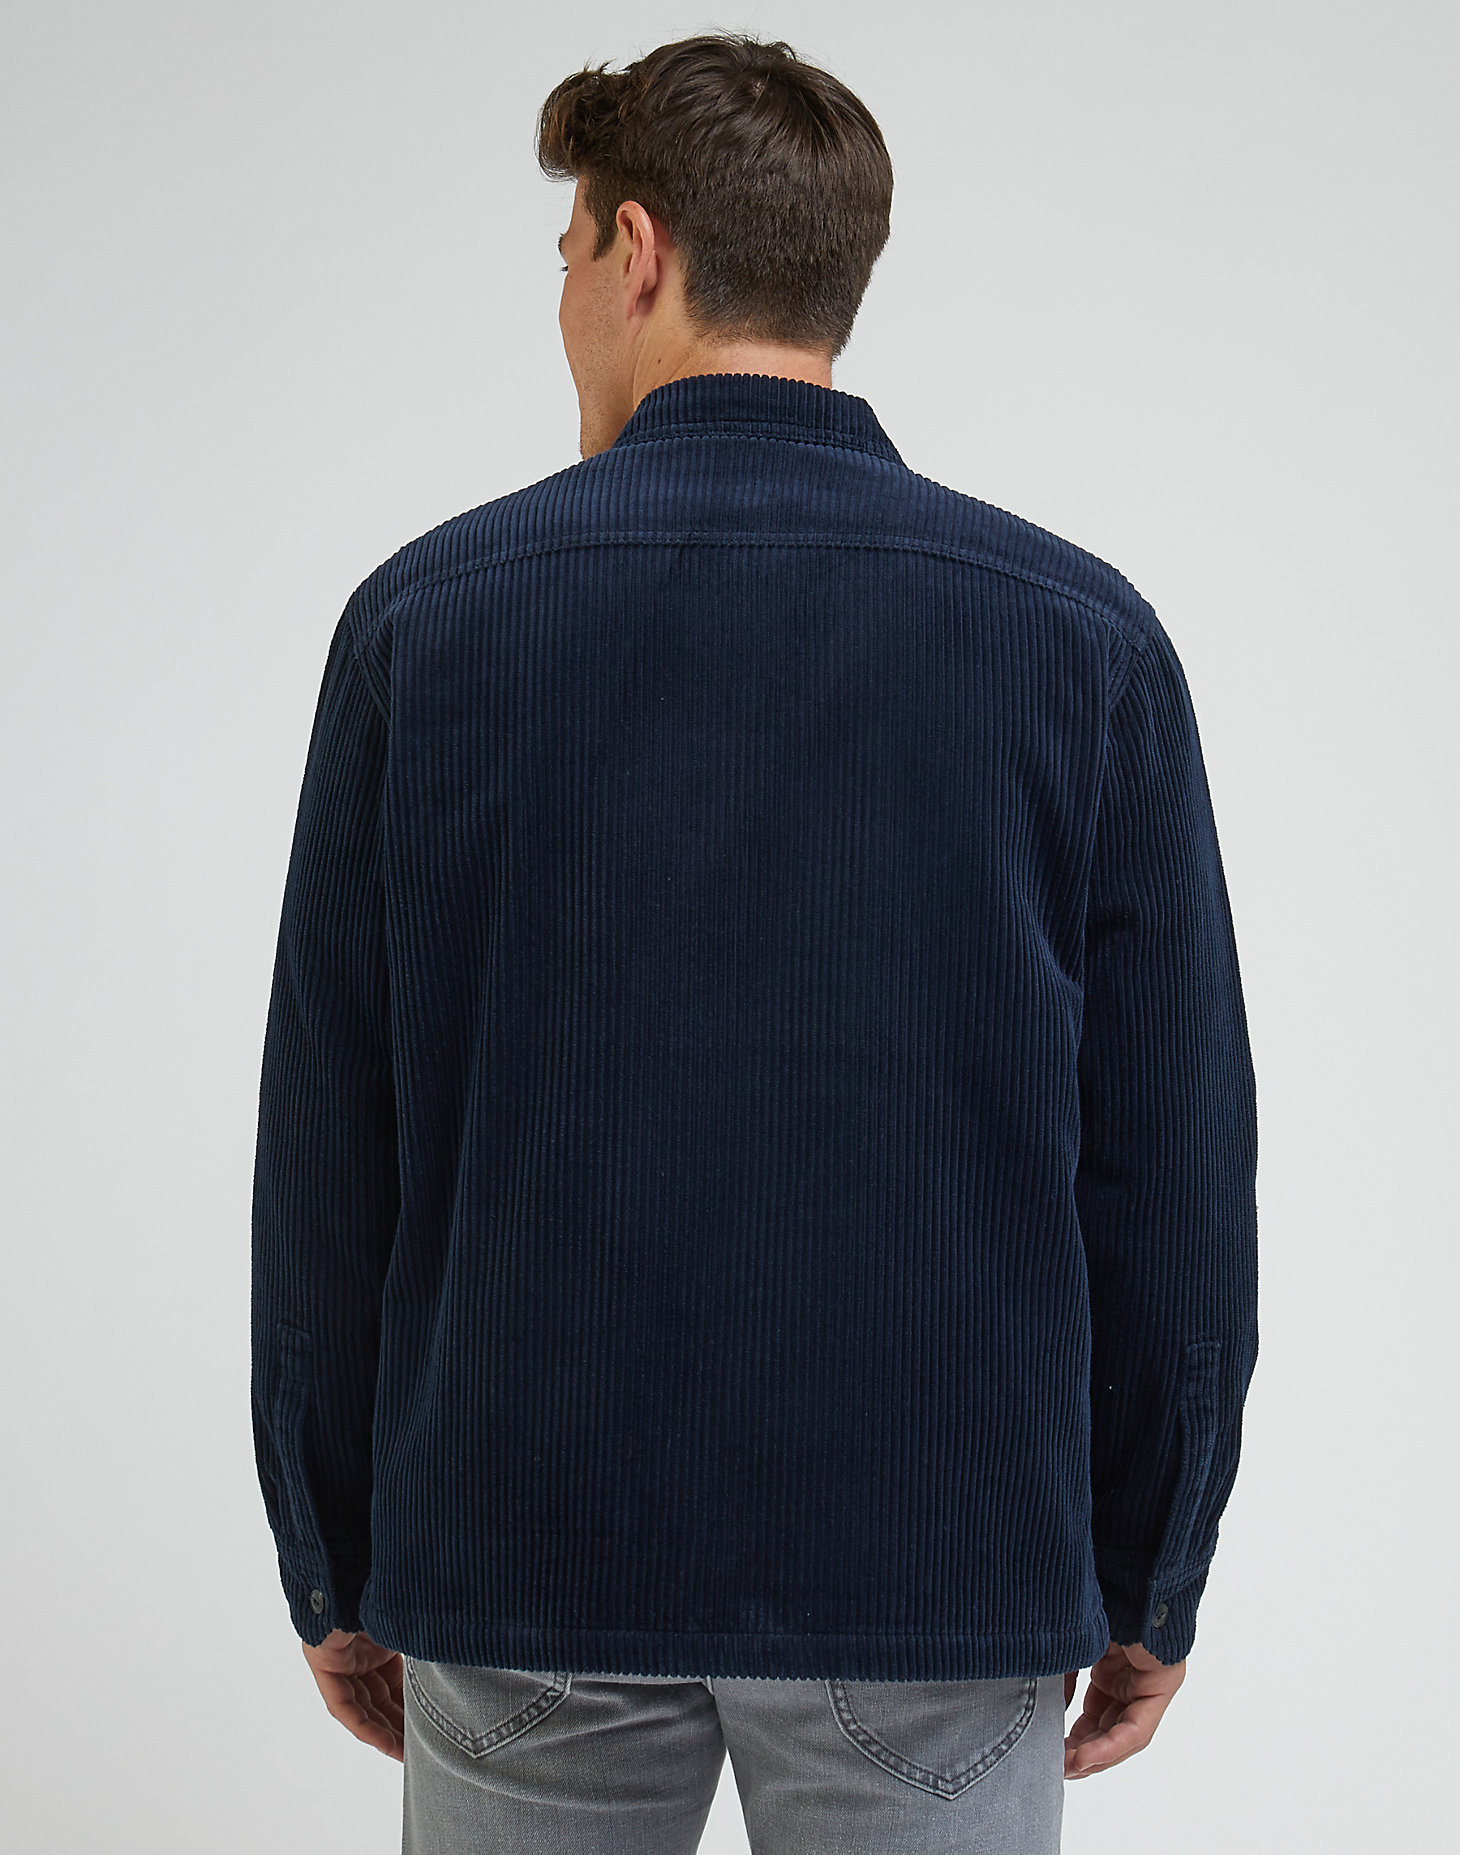 Relaxed Chetopa Overshirt in Sky Captain alternative view 1